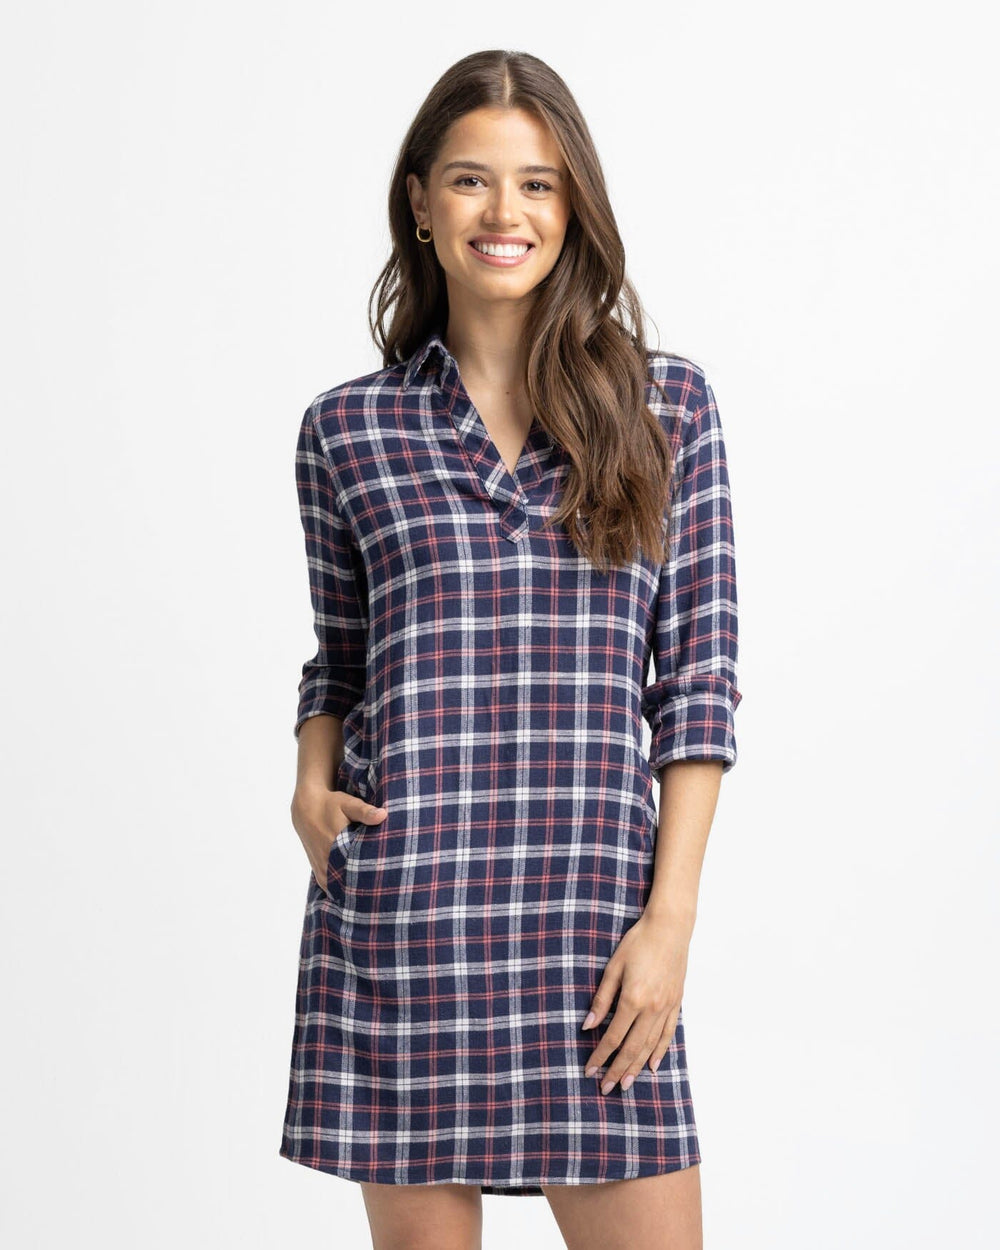 The front view of the Southern Tide Kamryn Chilly Morning Dress by Southern Tide - Nautical Navy